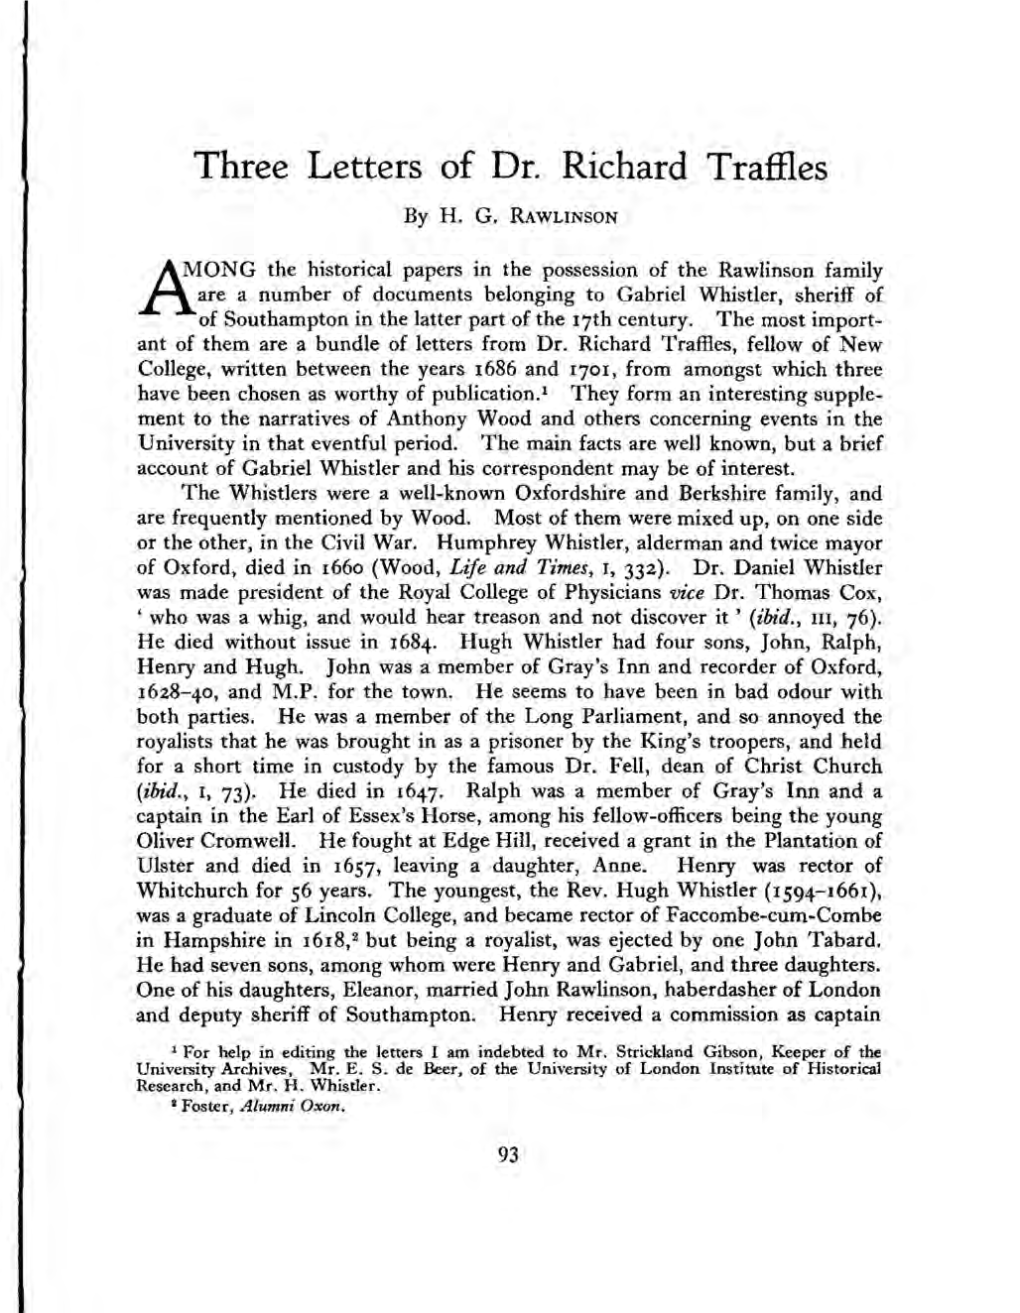 Three Letters of Dr. Richard Traffies